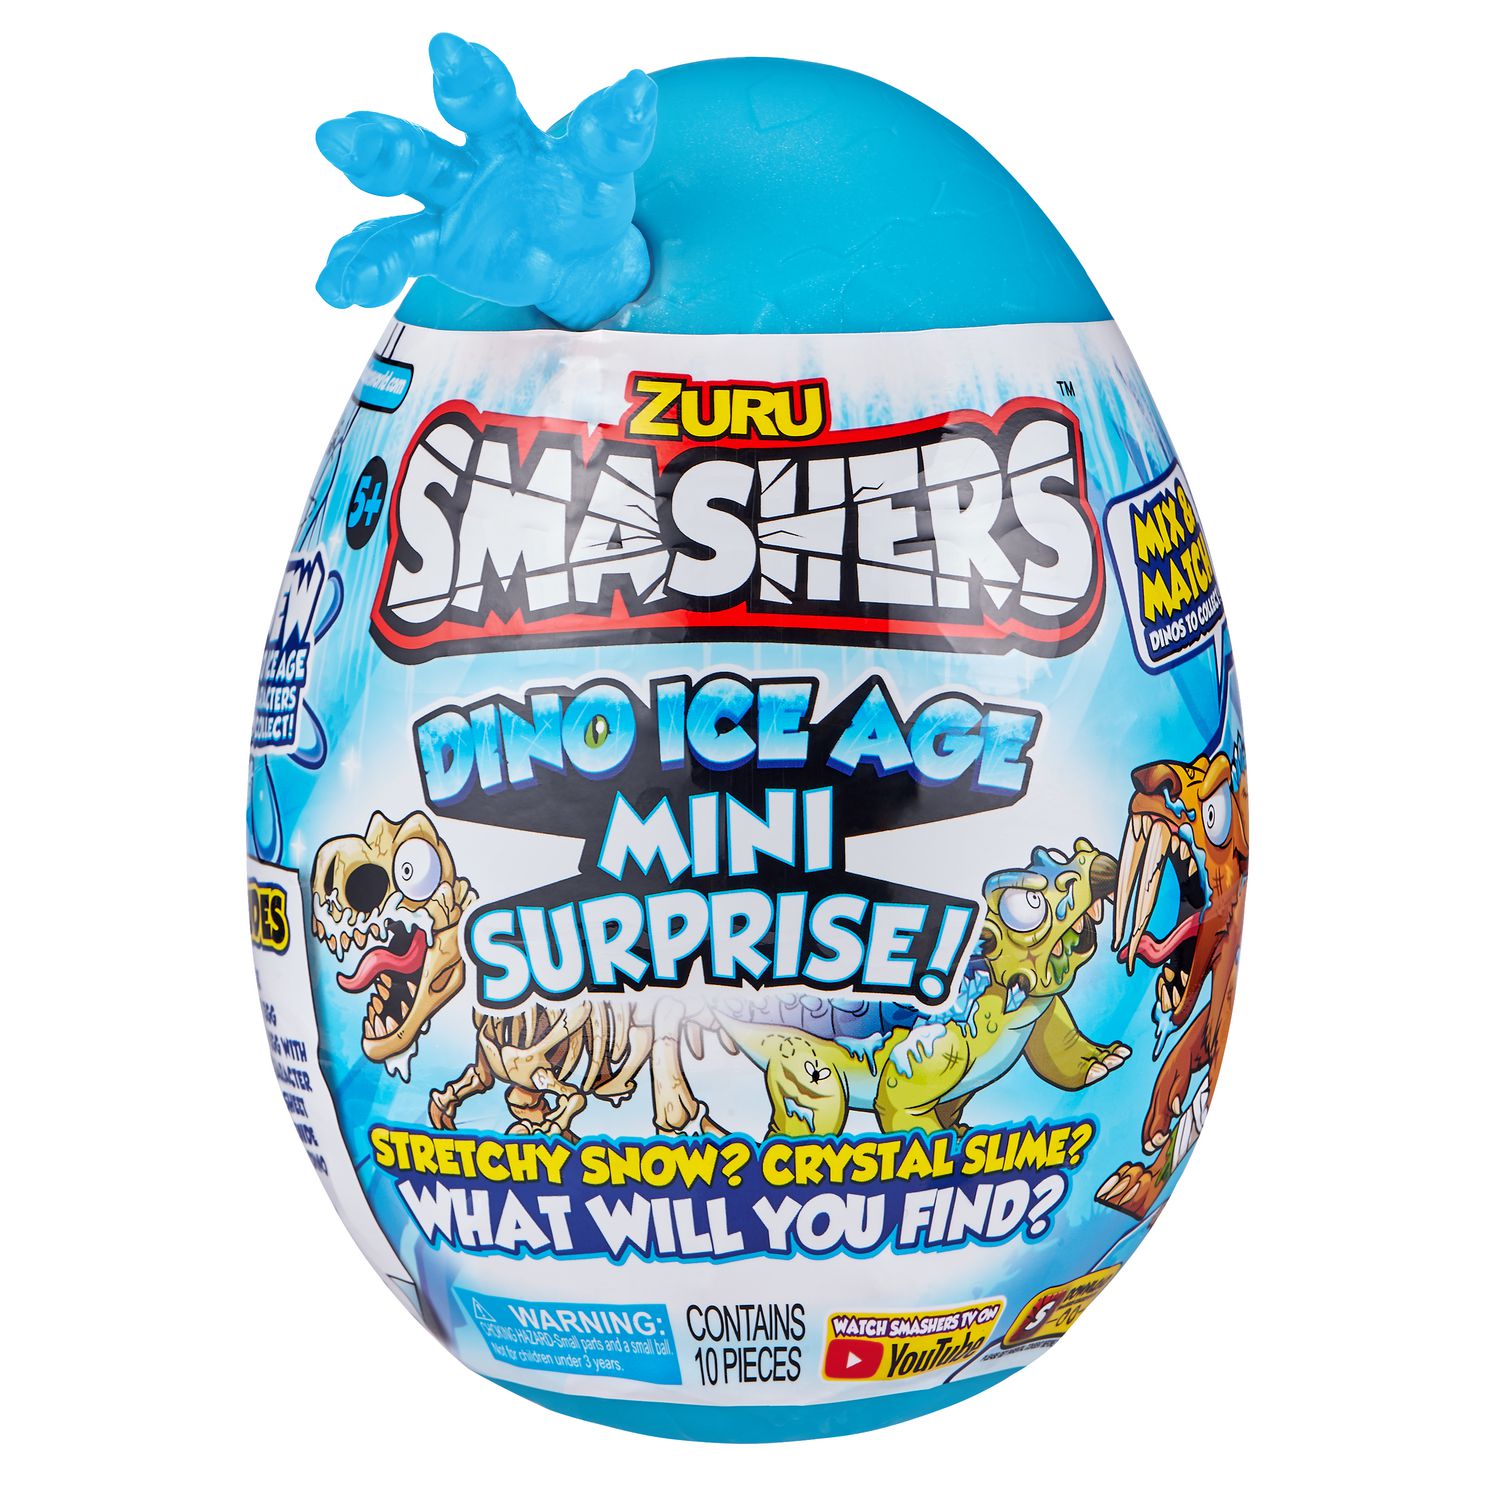 Giant Egg Assorted Claw Colour ZURU SMASHERS Dino Ice Age Surprise